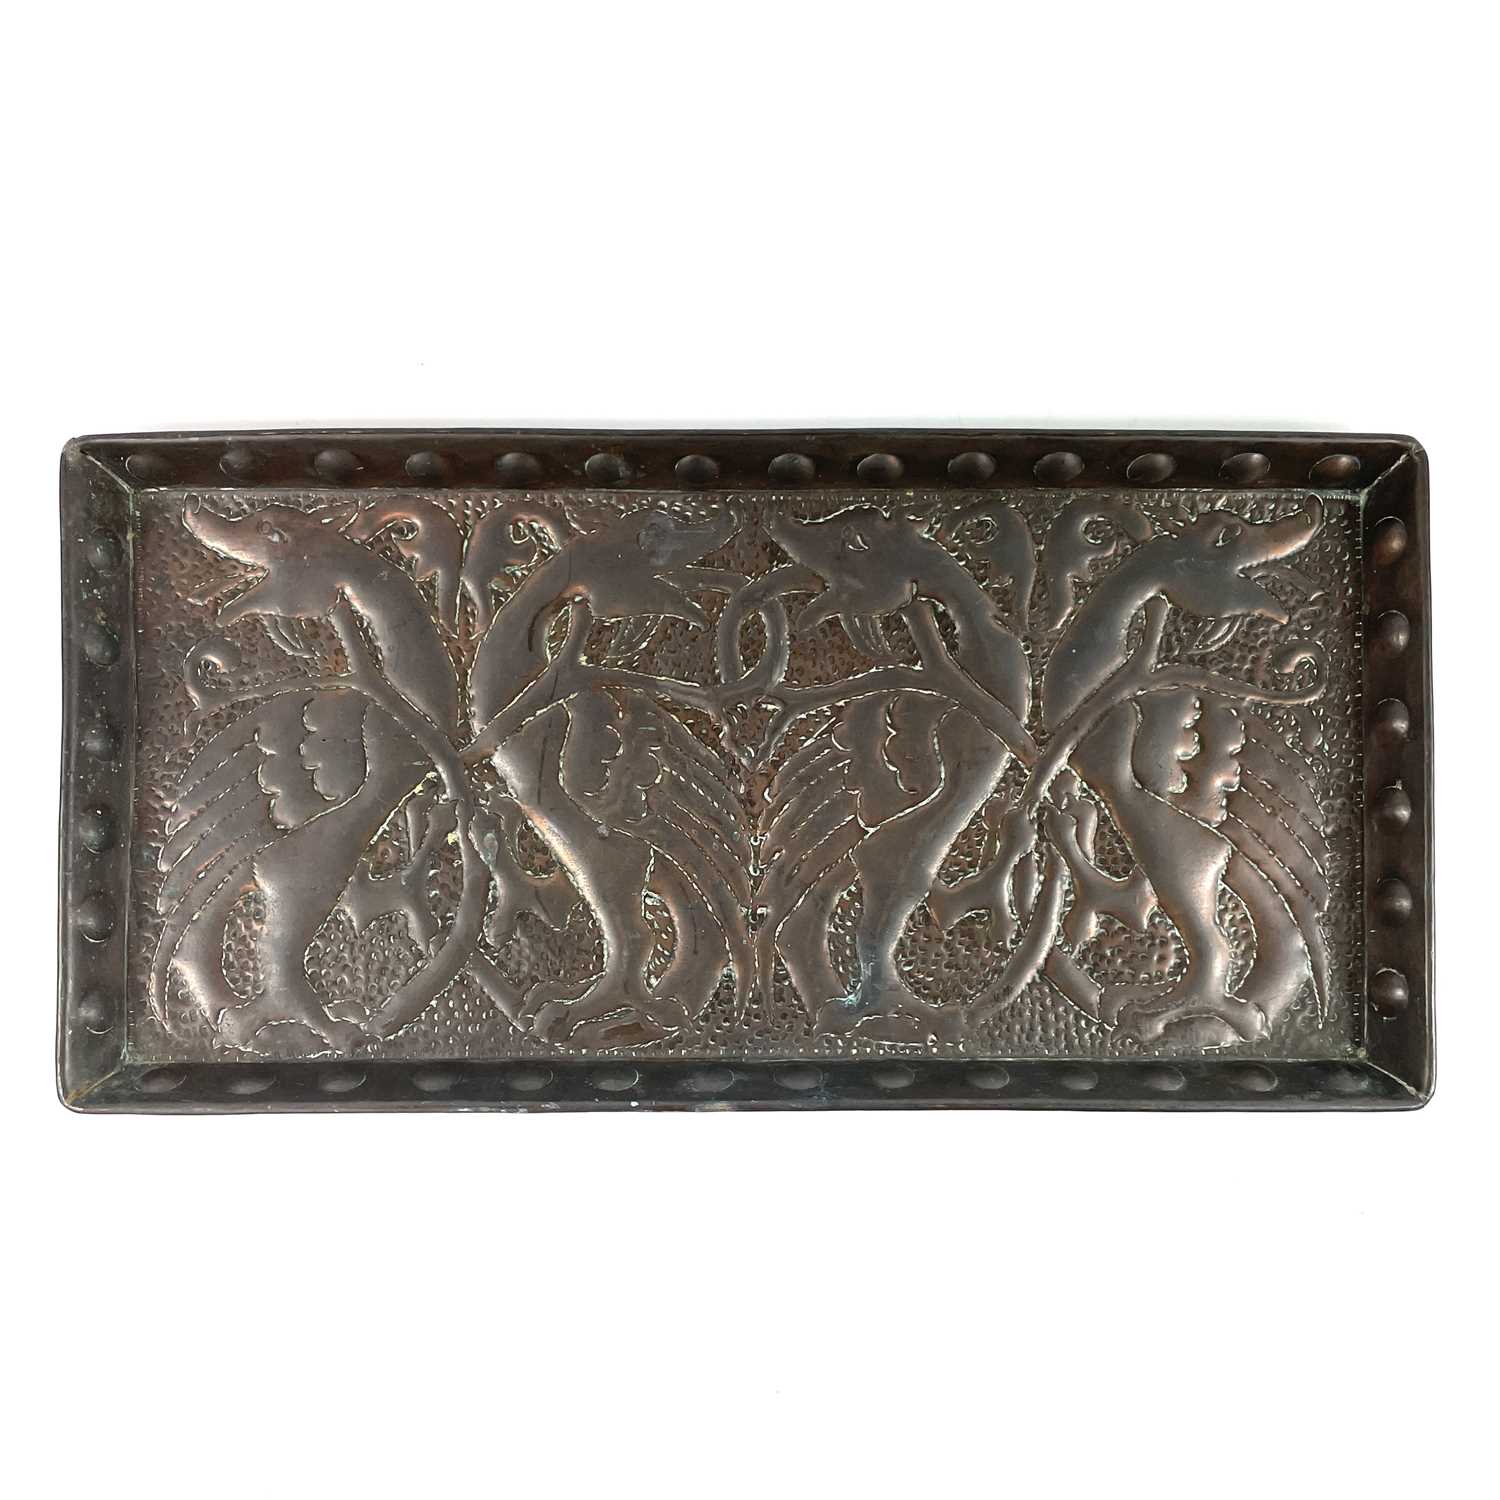 Lot 59 - An Arts & Crafts copper tray of rectangular form.